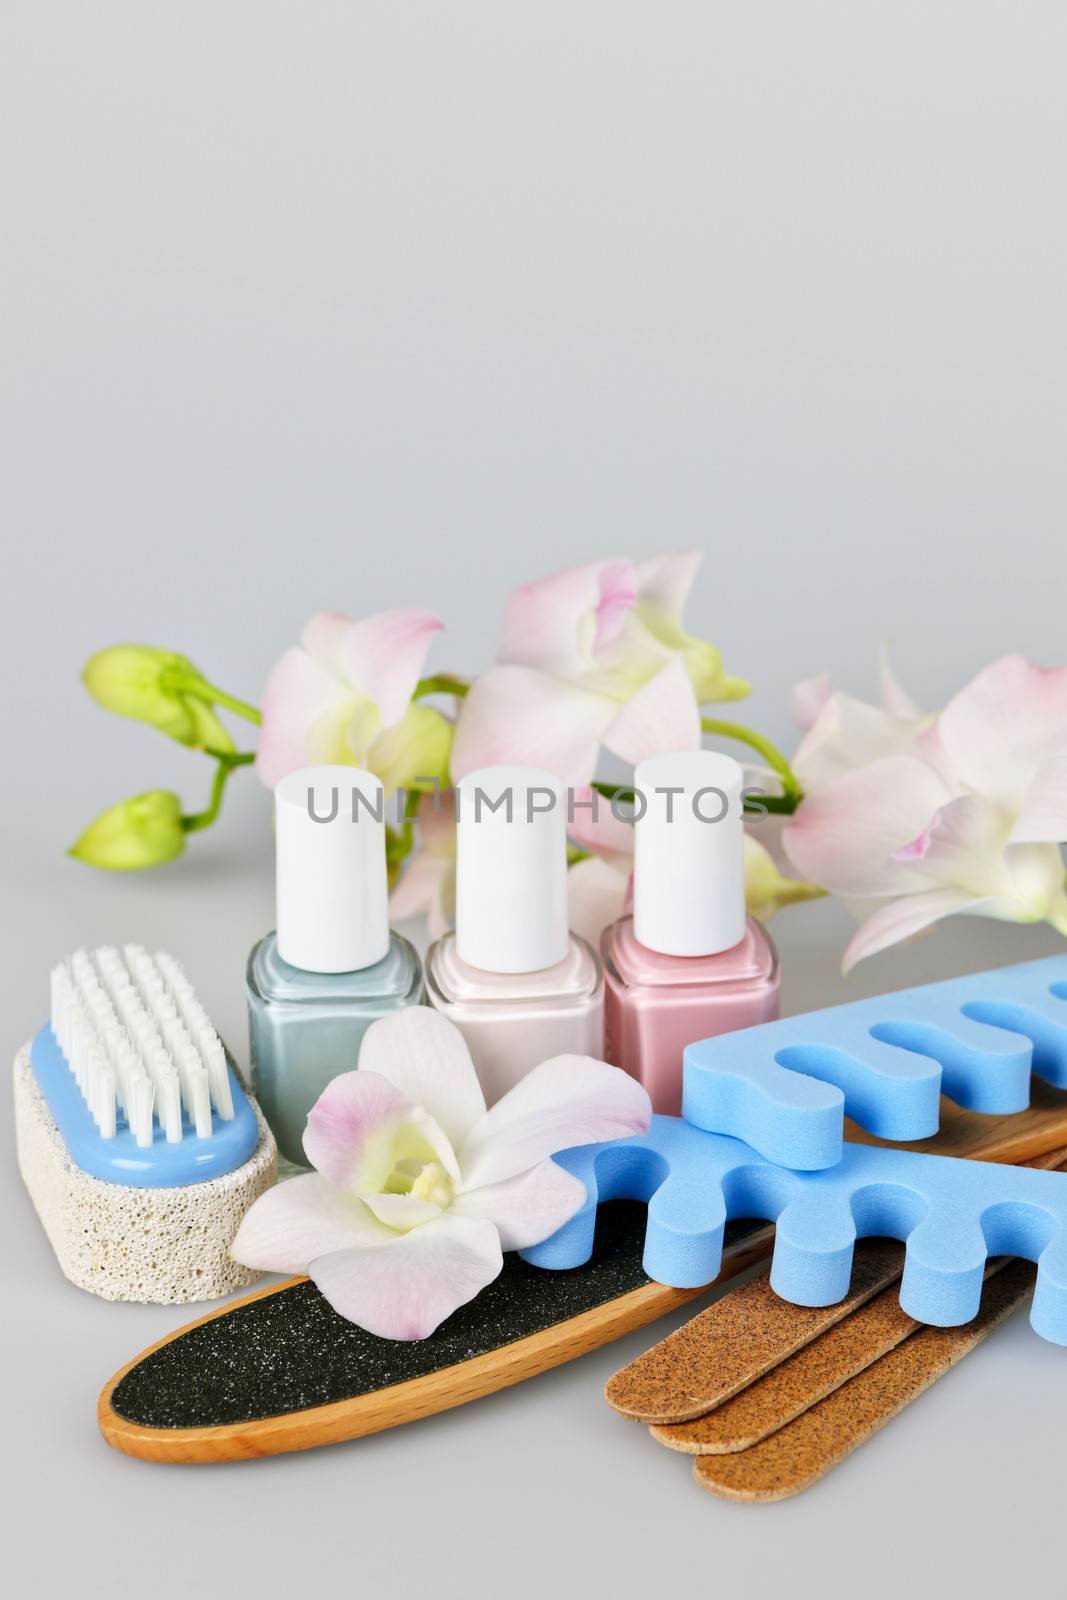 Pedicure accessories and tools by elenathewise